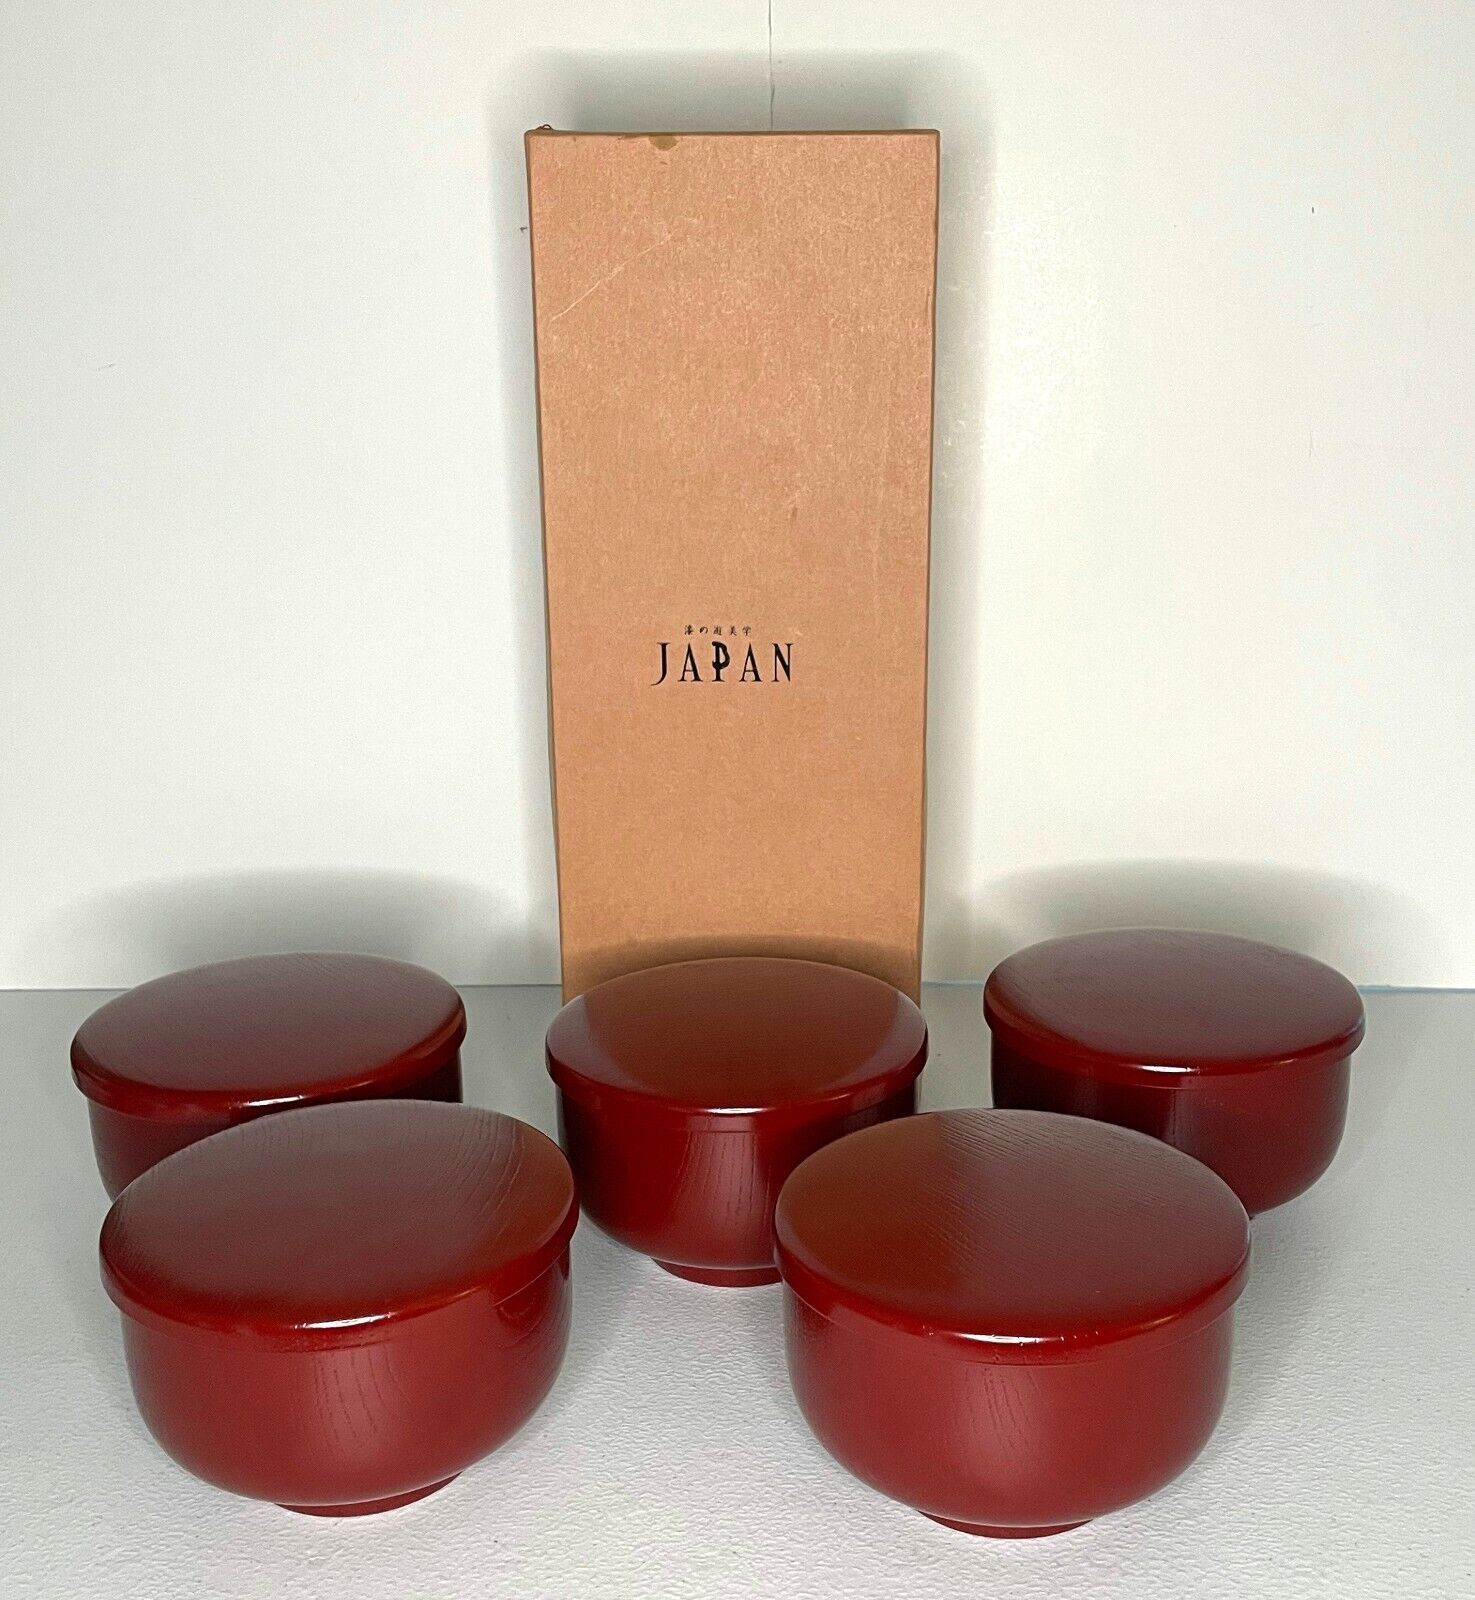 Vintage Showa Lacquerware Suction Bowls with Lids / Plates  Set of 5 Japan Red